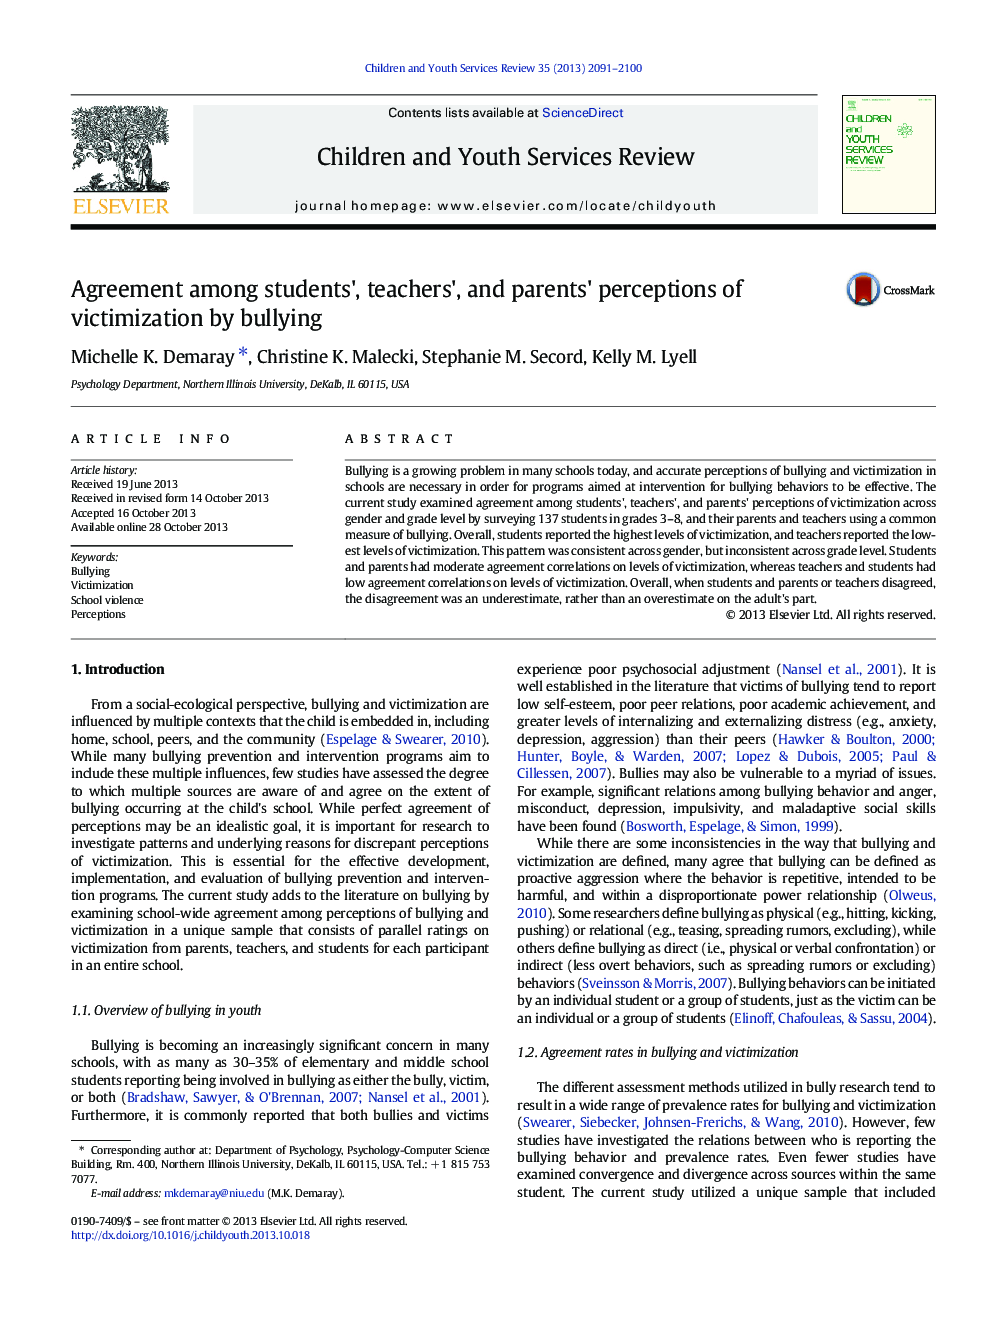 Agreement among students', teachers', and parents' perceptions of victimization by bullying